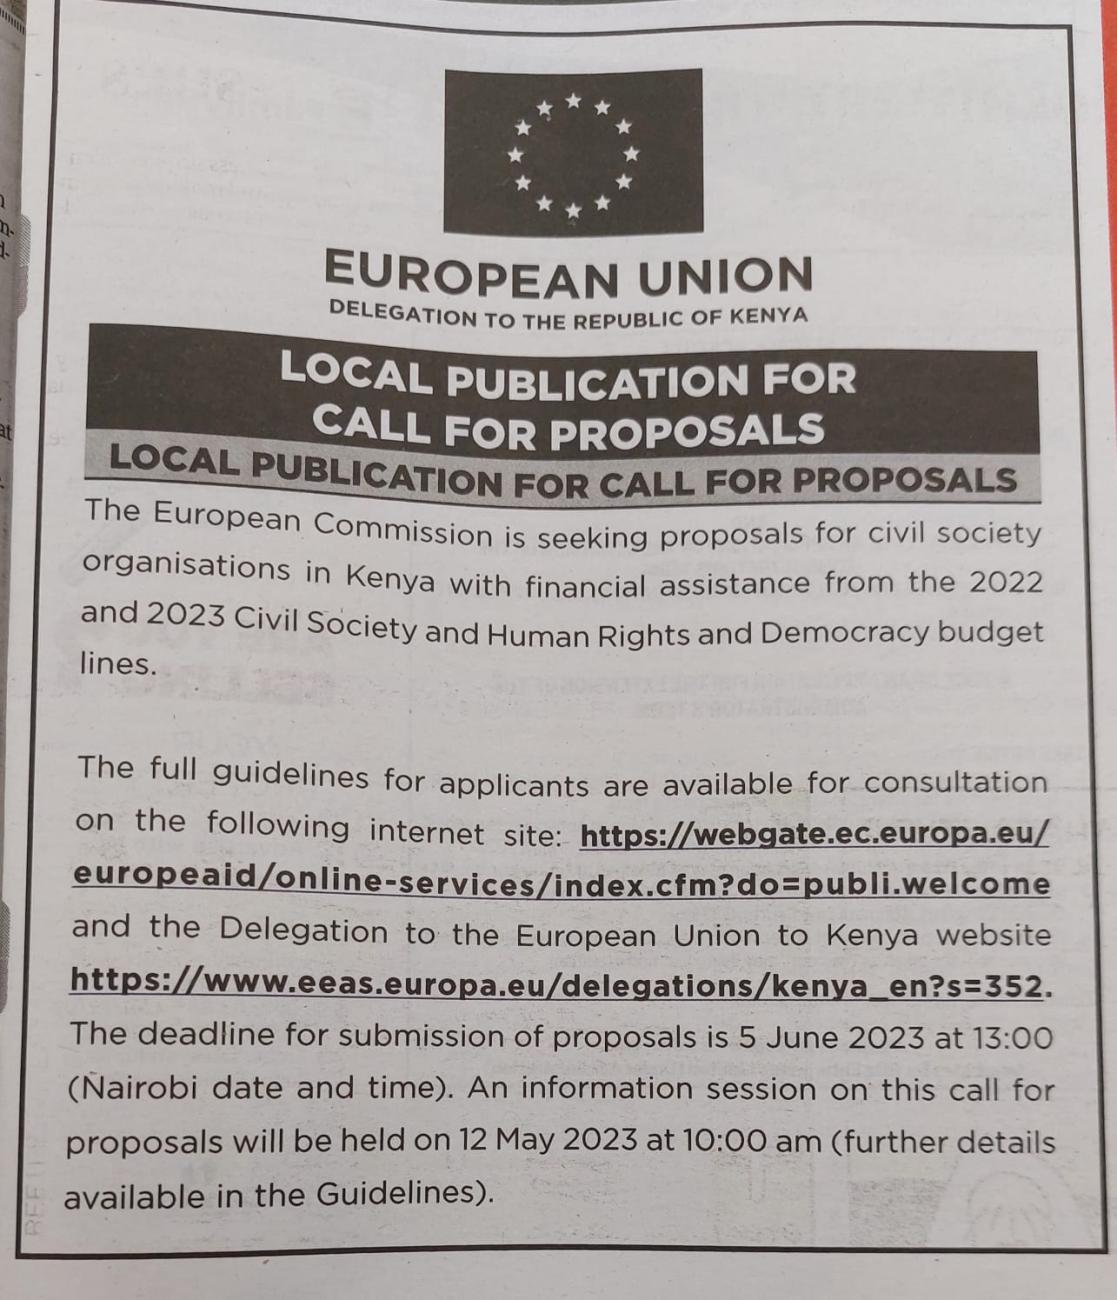 EU Delegation launched call for proposals 